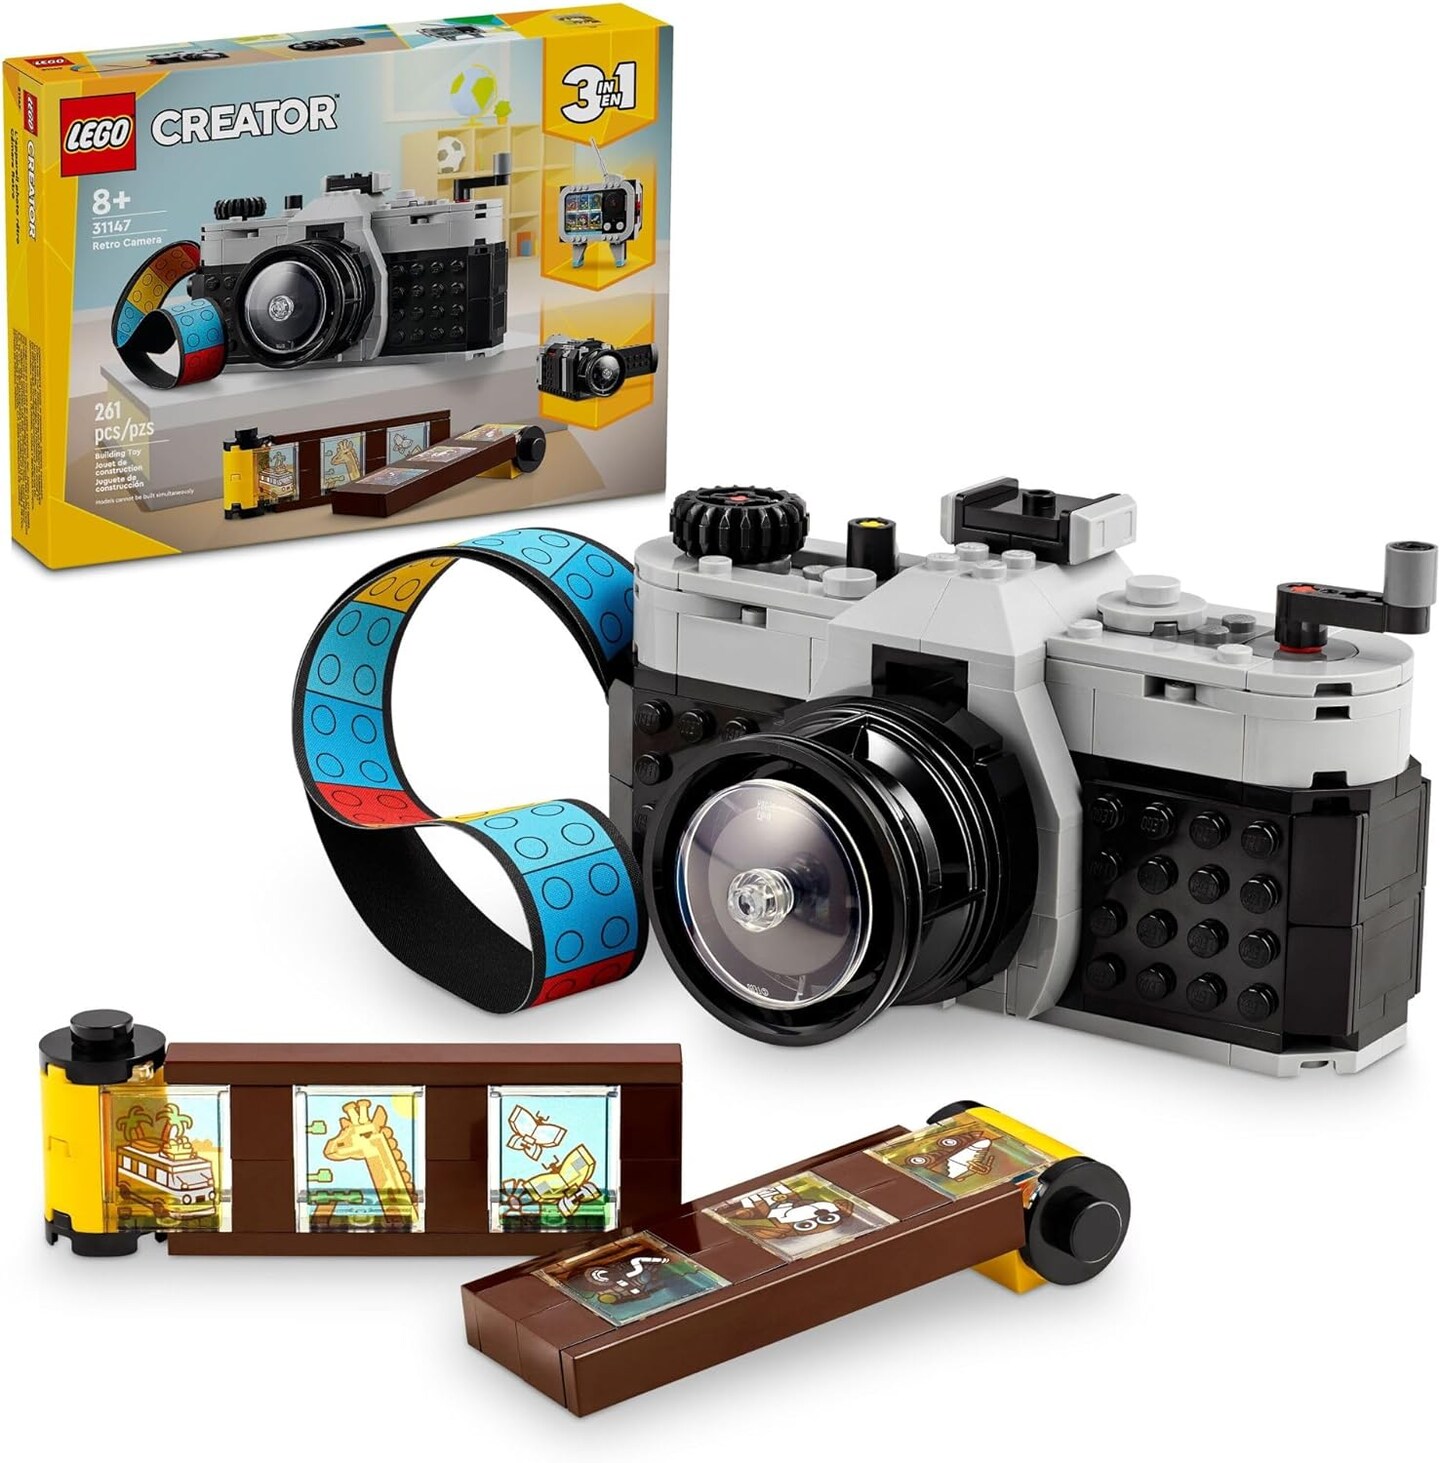 LEGO Creator 3 in 1 Retro Camera Toy, Transforms from Toy Camera to Retro Video Camera to Retro TV Set, Photography Gift for Boys and Girls Ages 8 Years Old and Up Who Enjoy Creative Play, 31147